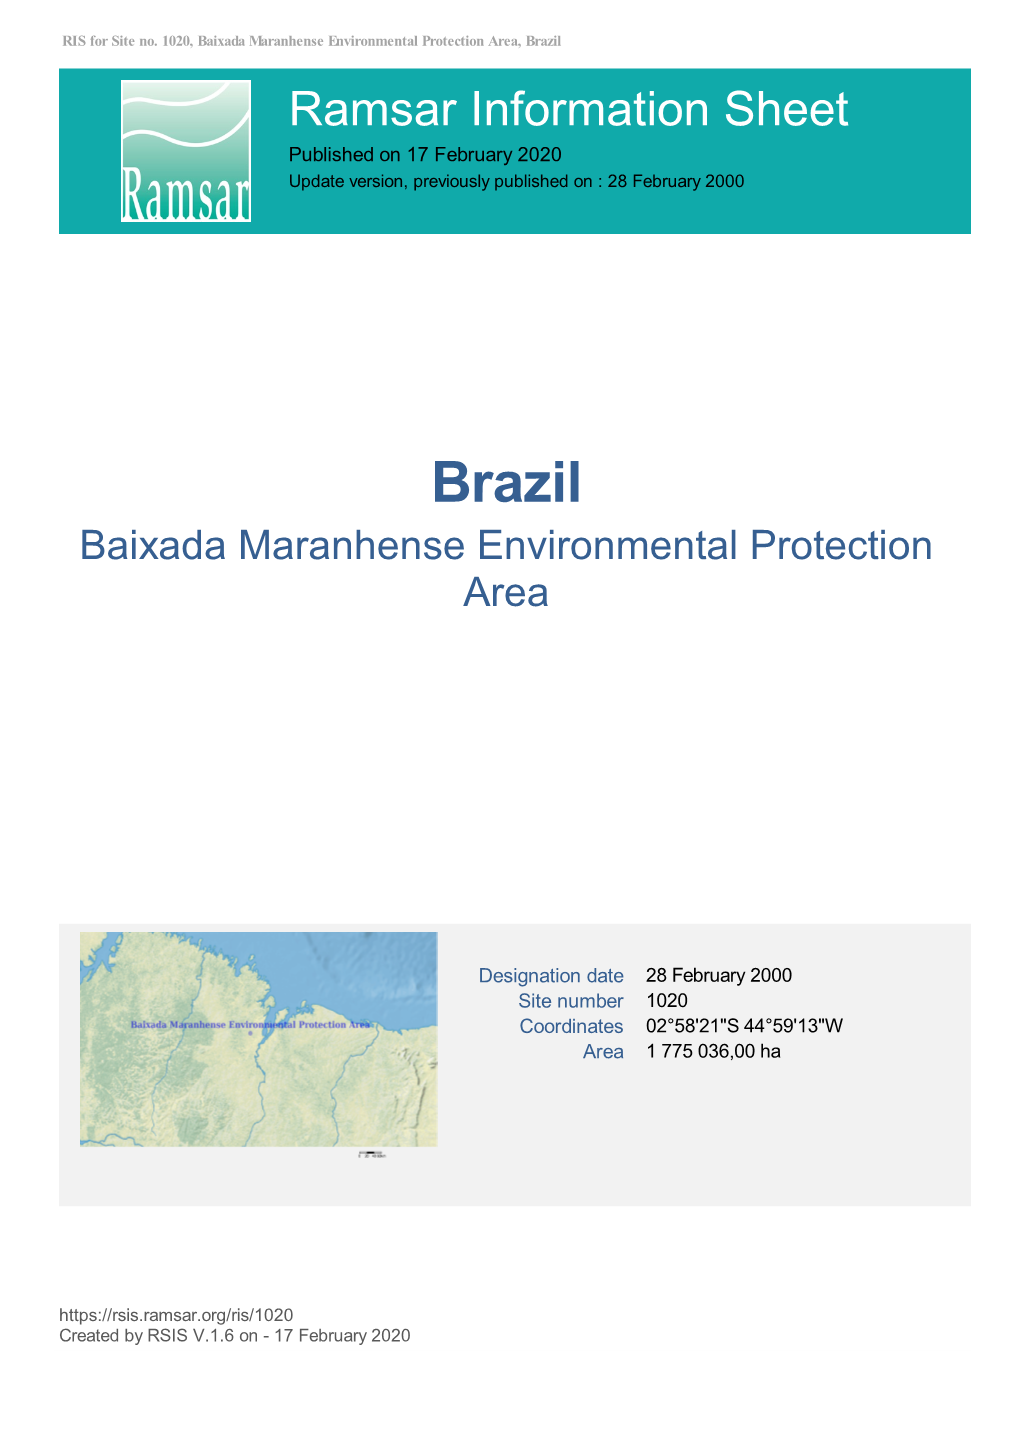 Brazil Ramsar Information Sheet Published on 17 February 2020 Update Version, Previously Published on : 28 February 2000